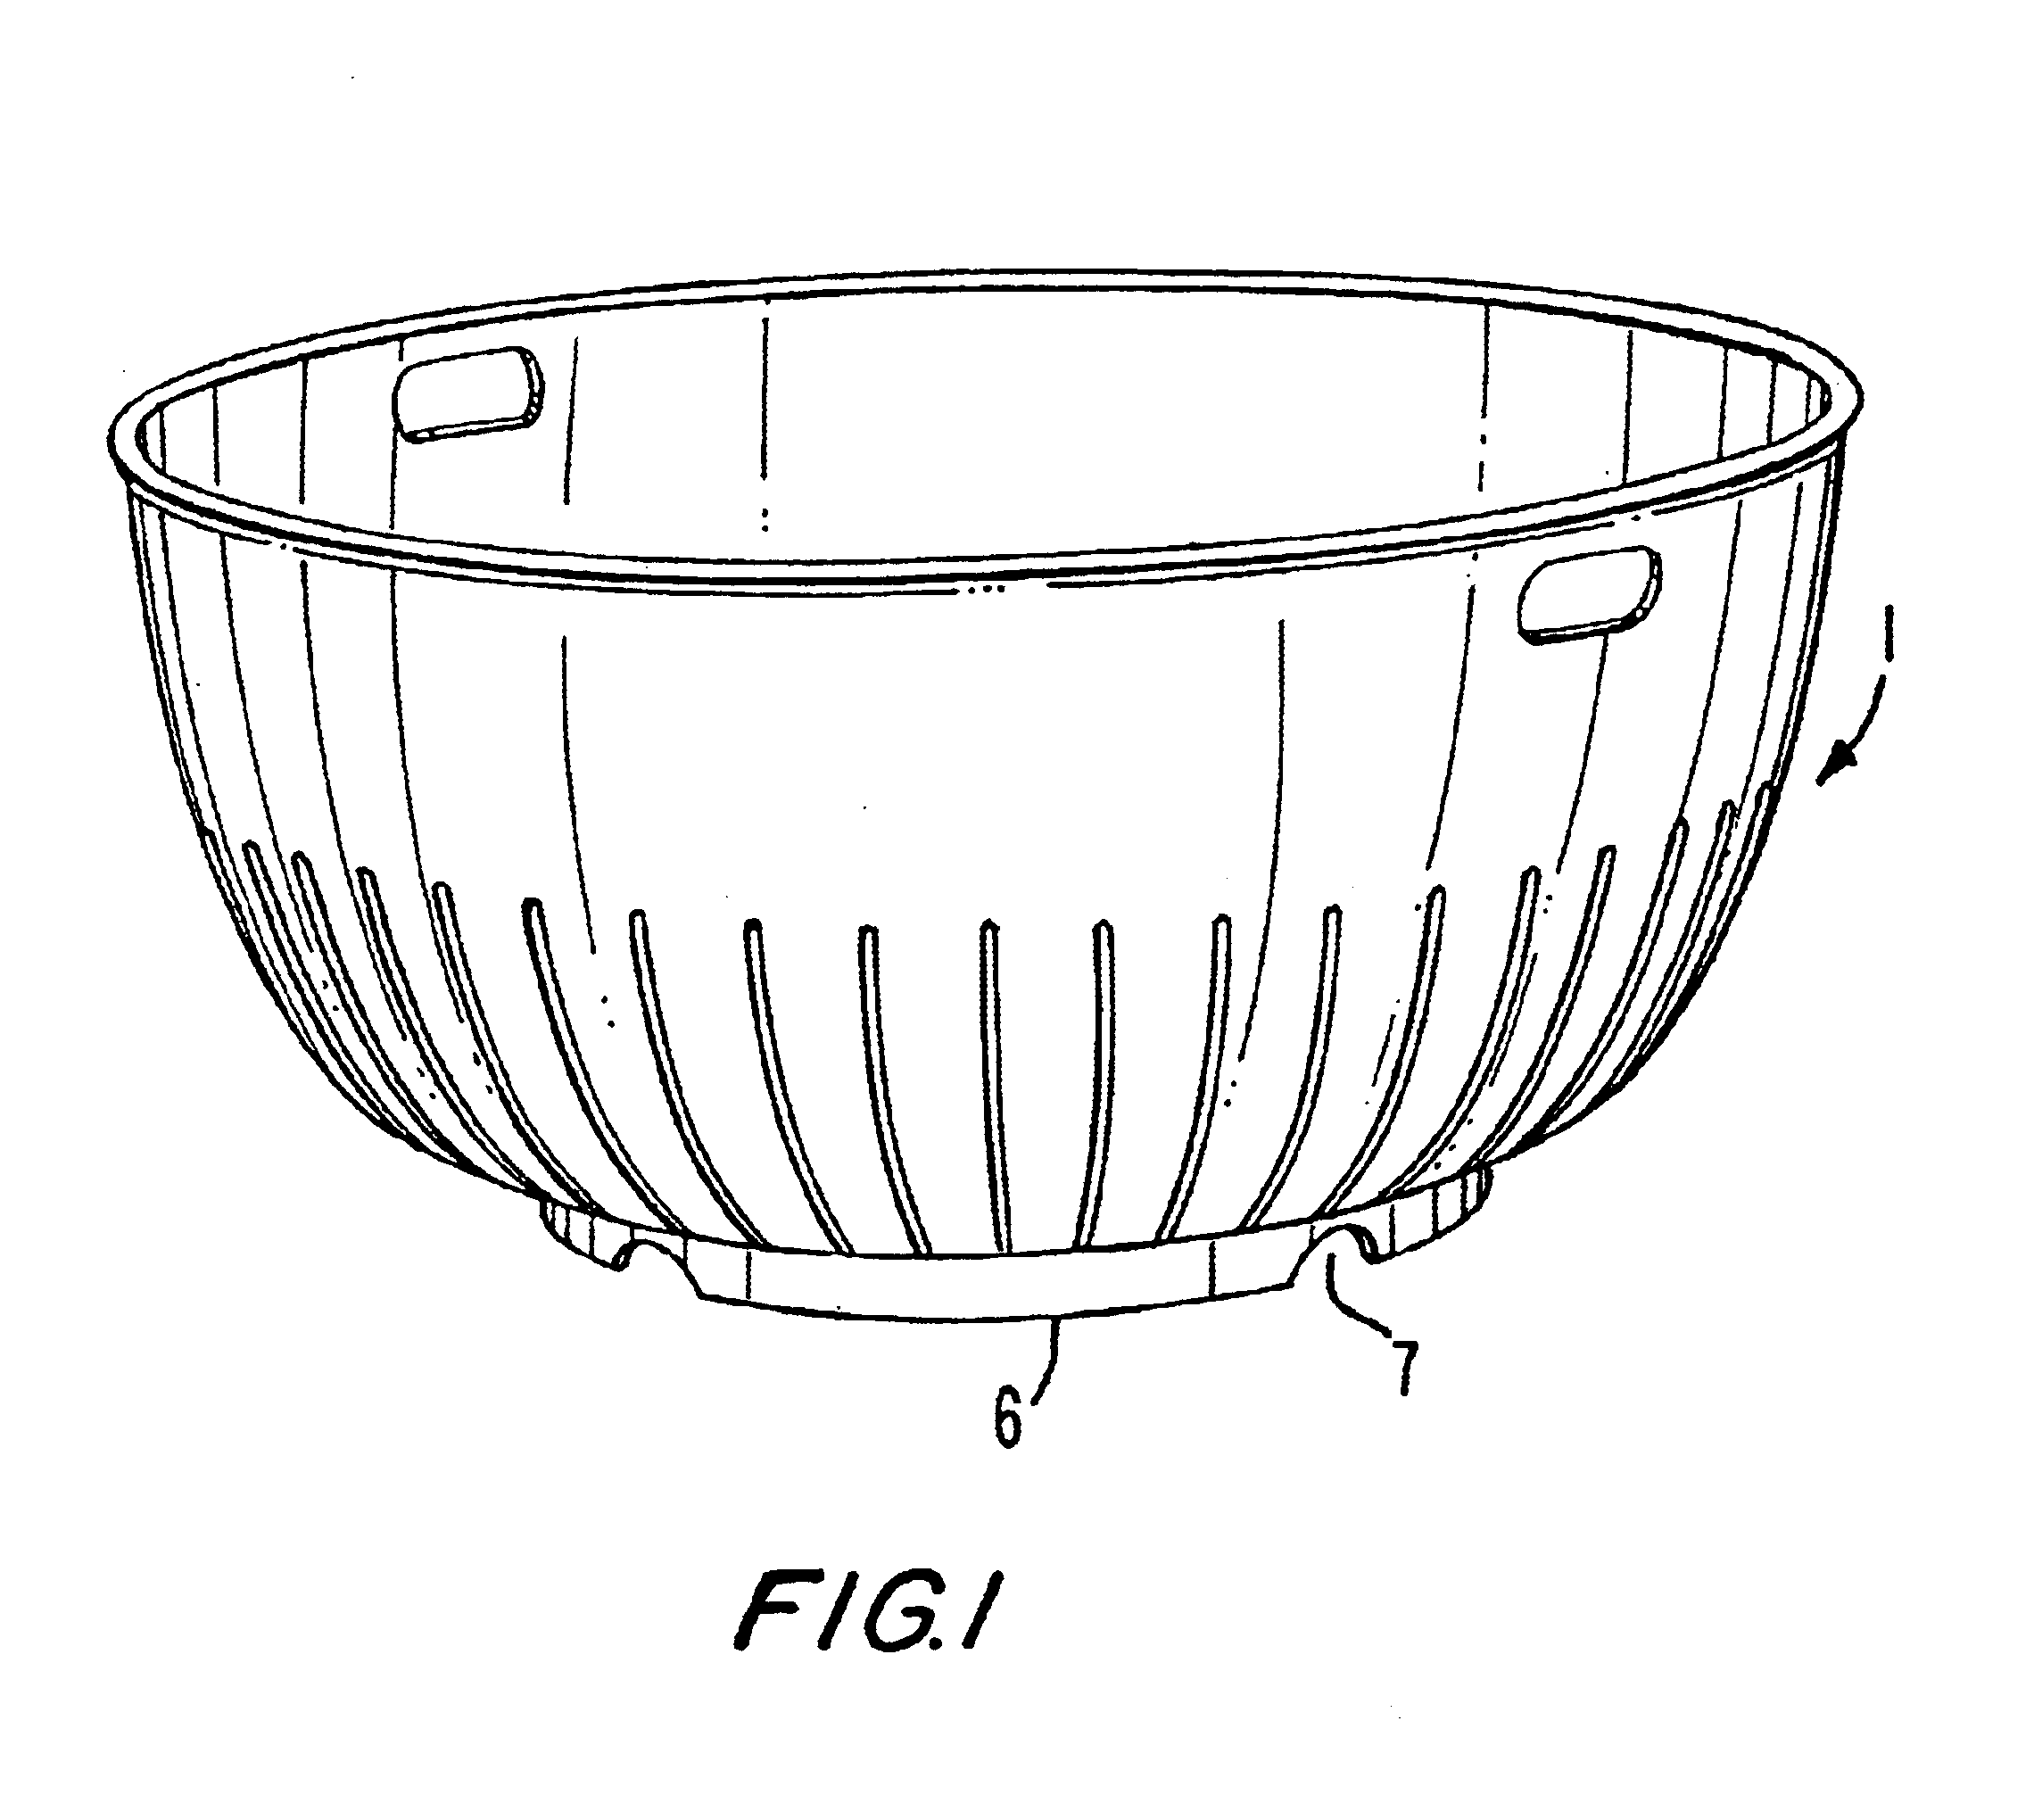 Device combining 3 functions in one for washing, serving and storing berries, grapes, and other fruits